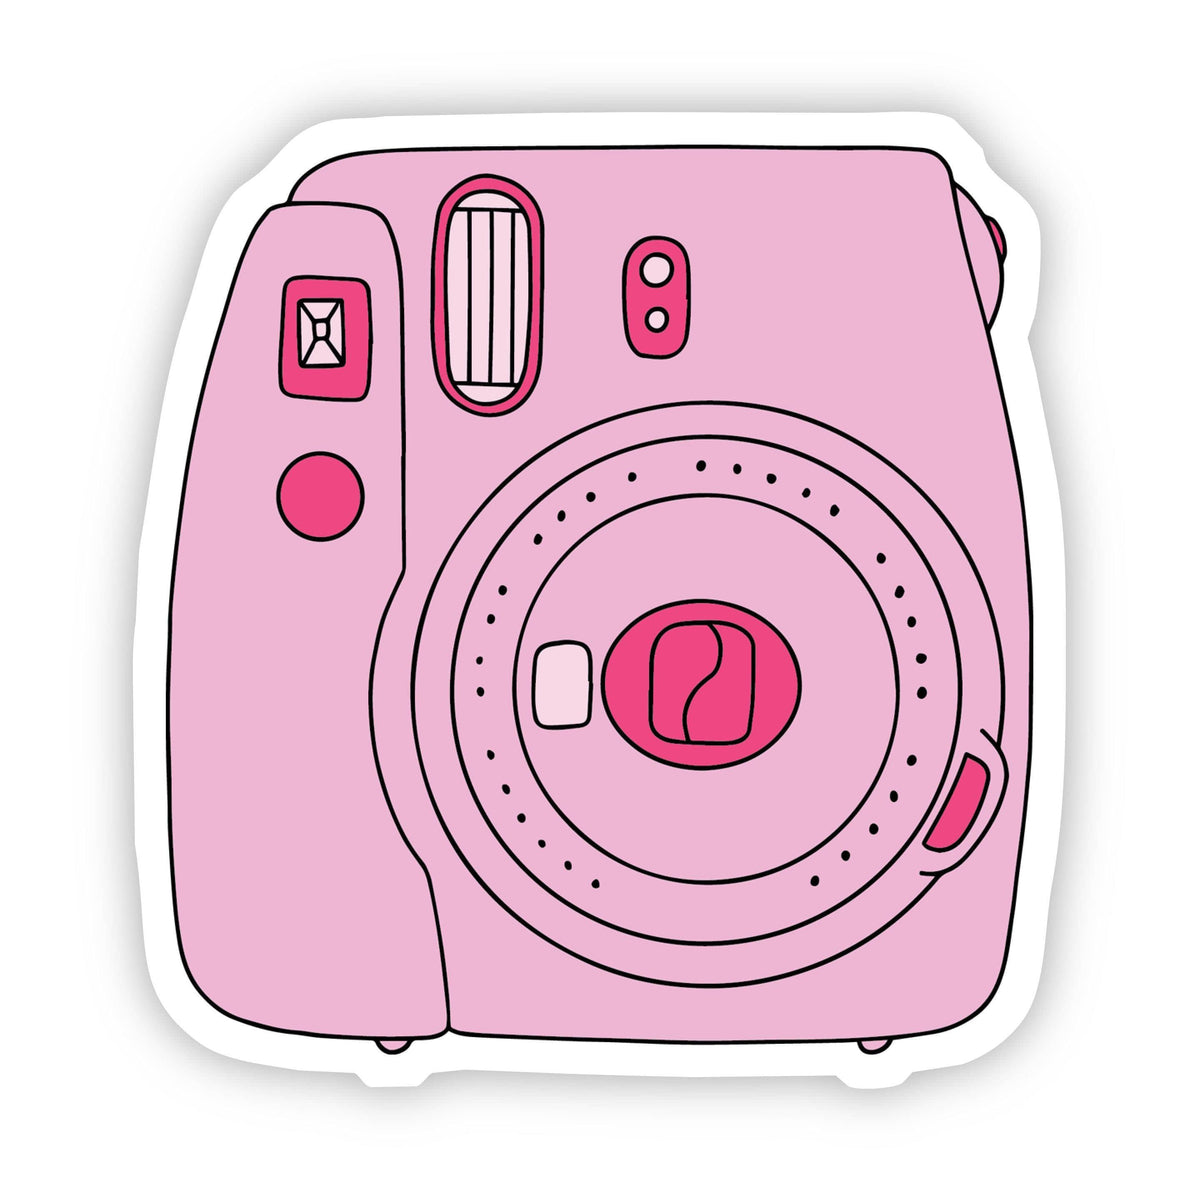 Classic Instant Camera Aesthetic Sticker – Why I Love Where I Live